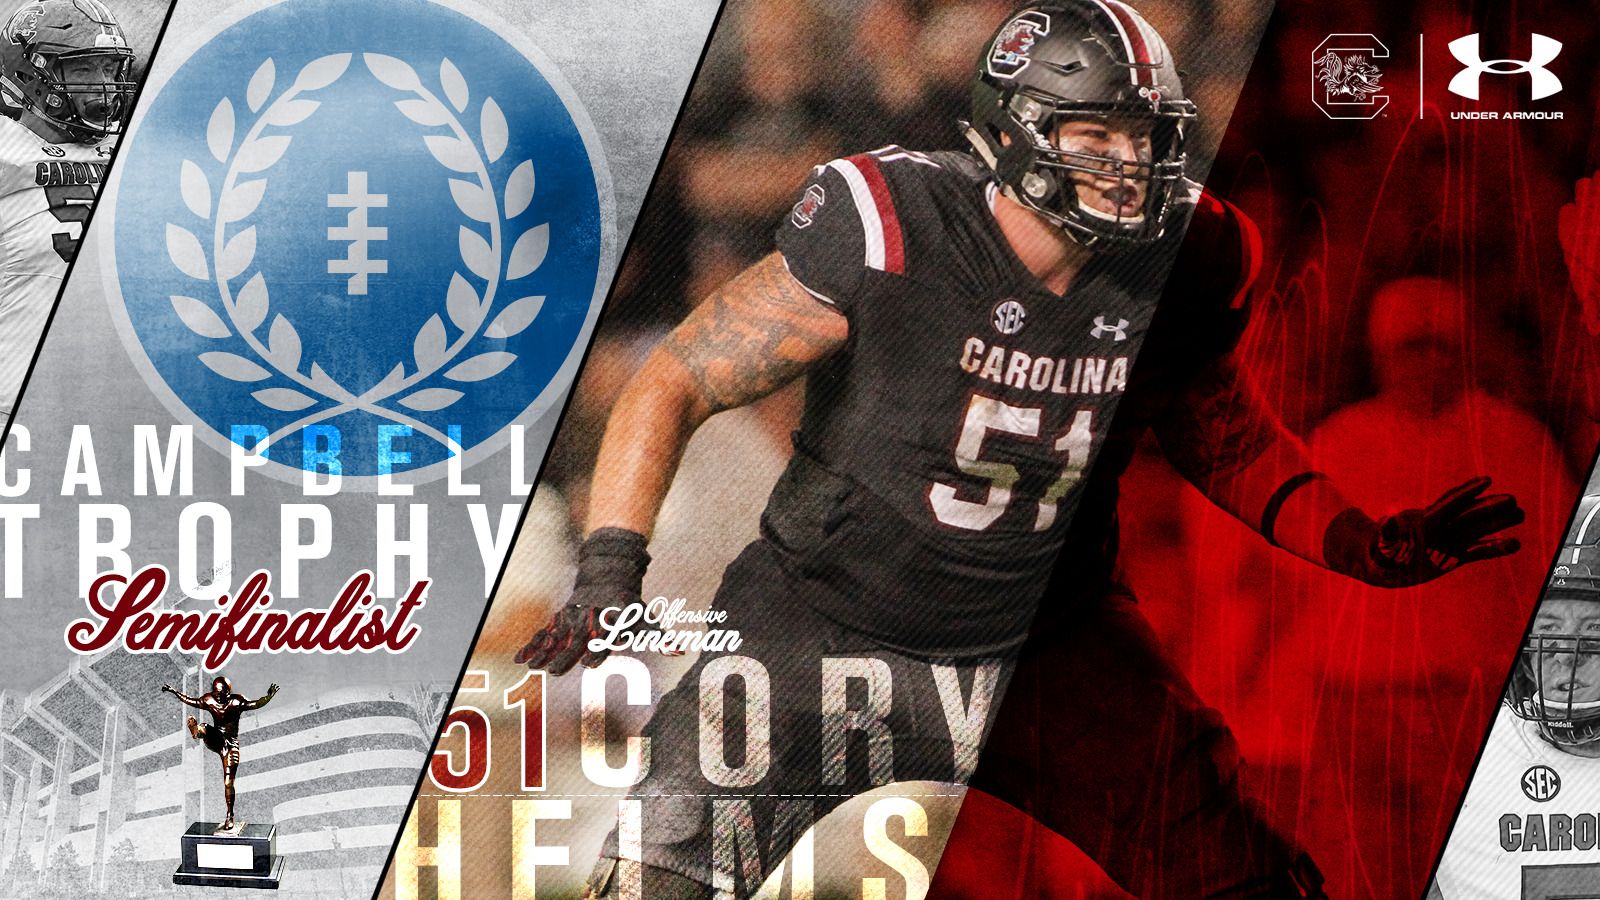 Cory Helms Named Semifinalist for Campbell Trophy